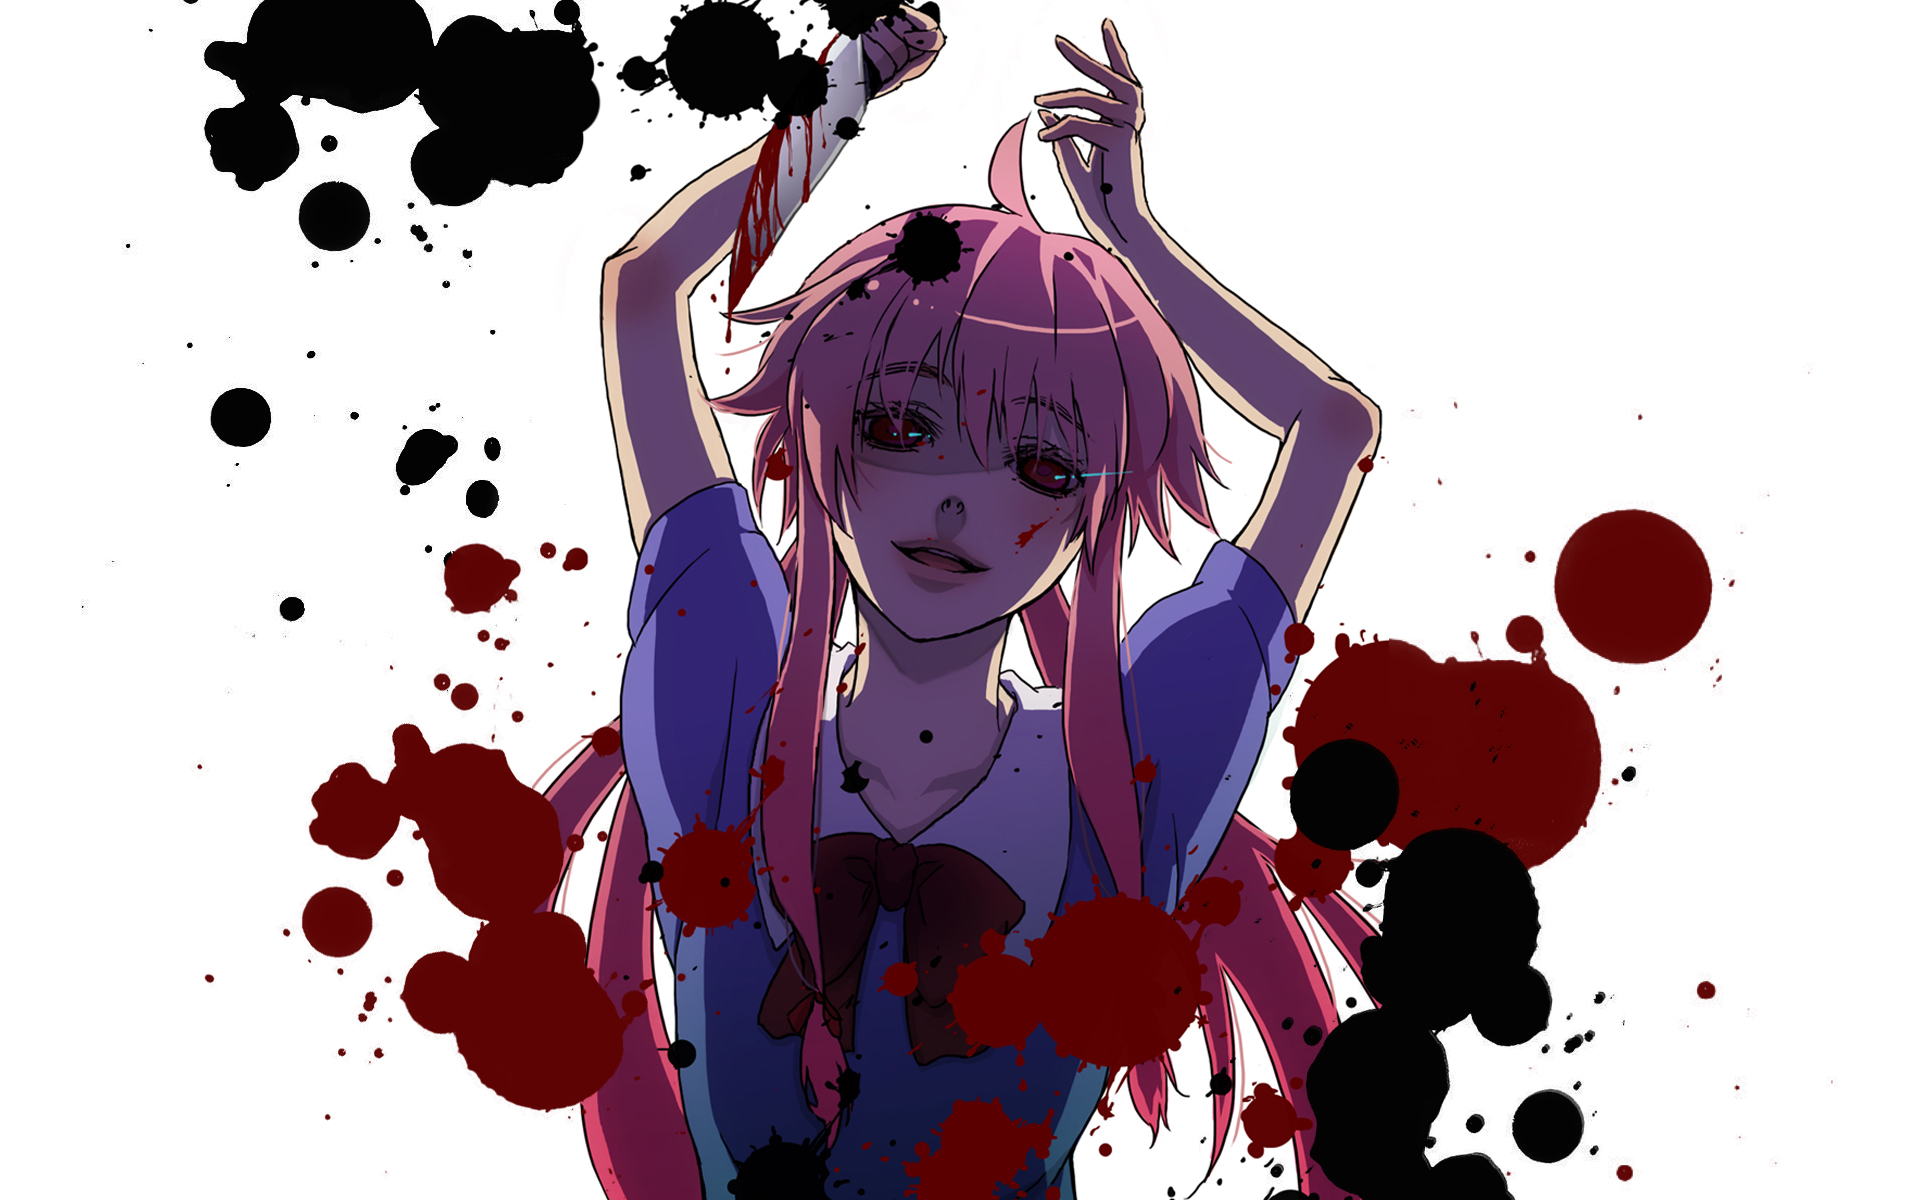 Download Future Diary Background